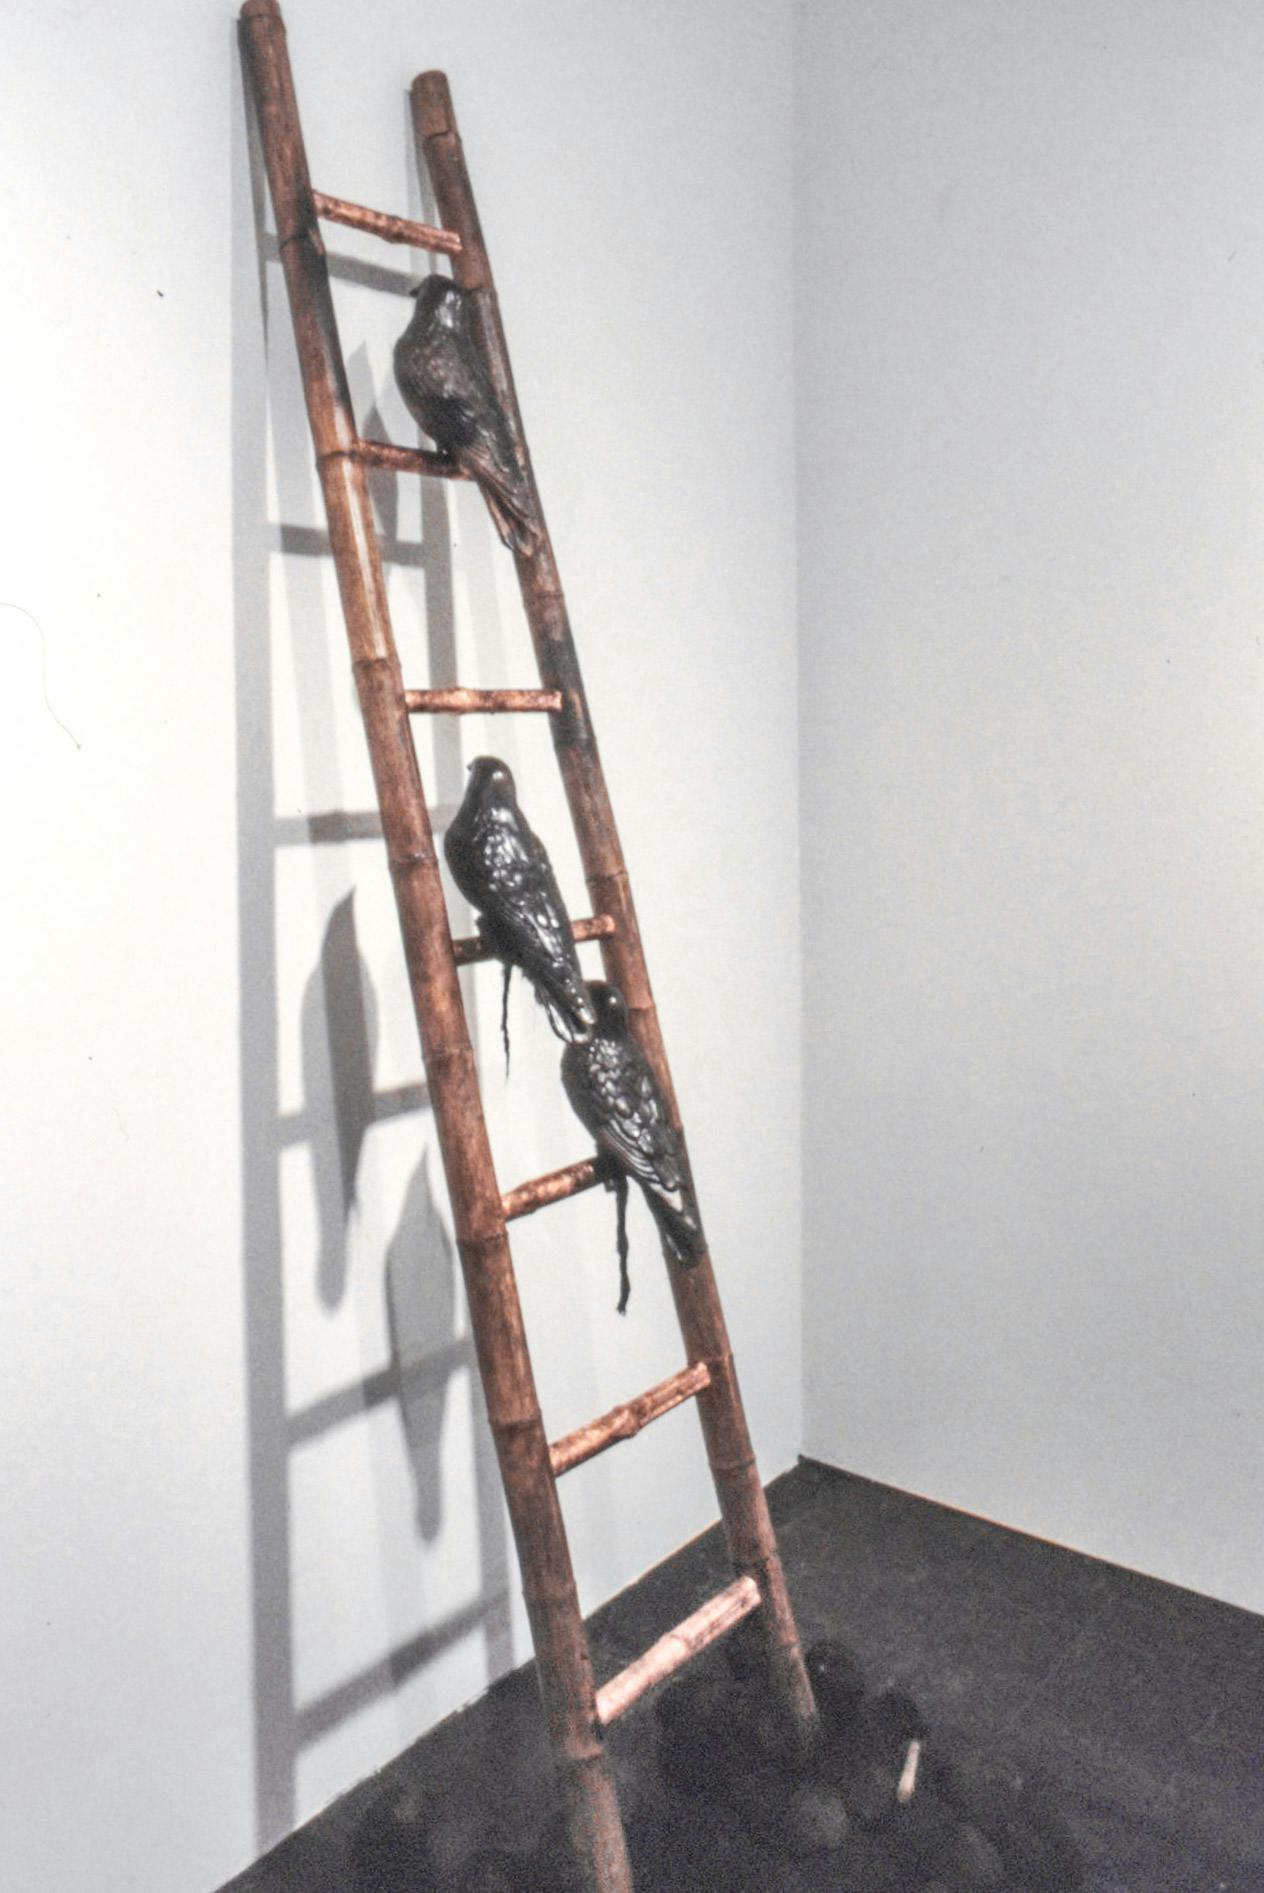 A closeup of an artwork in the corner of a gallery. The work is a bronze wood-like ladder with dark metal birds resting on the rungs. On the floor, there are small black rocks around the ladder.